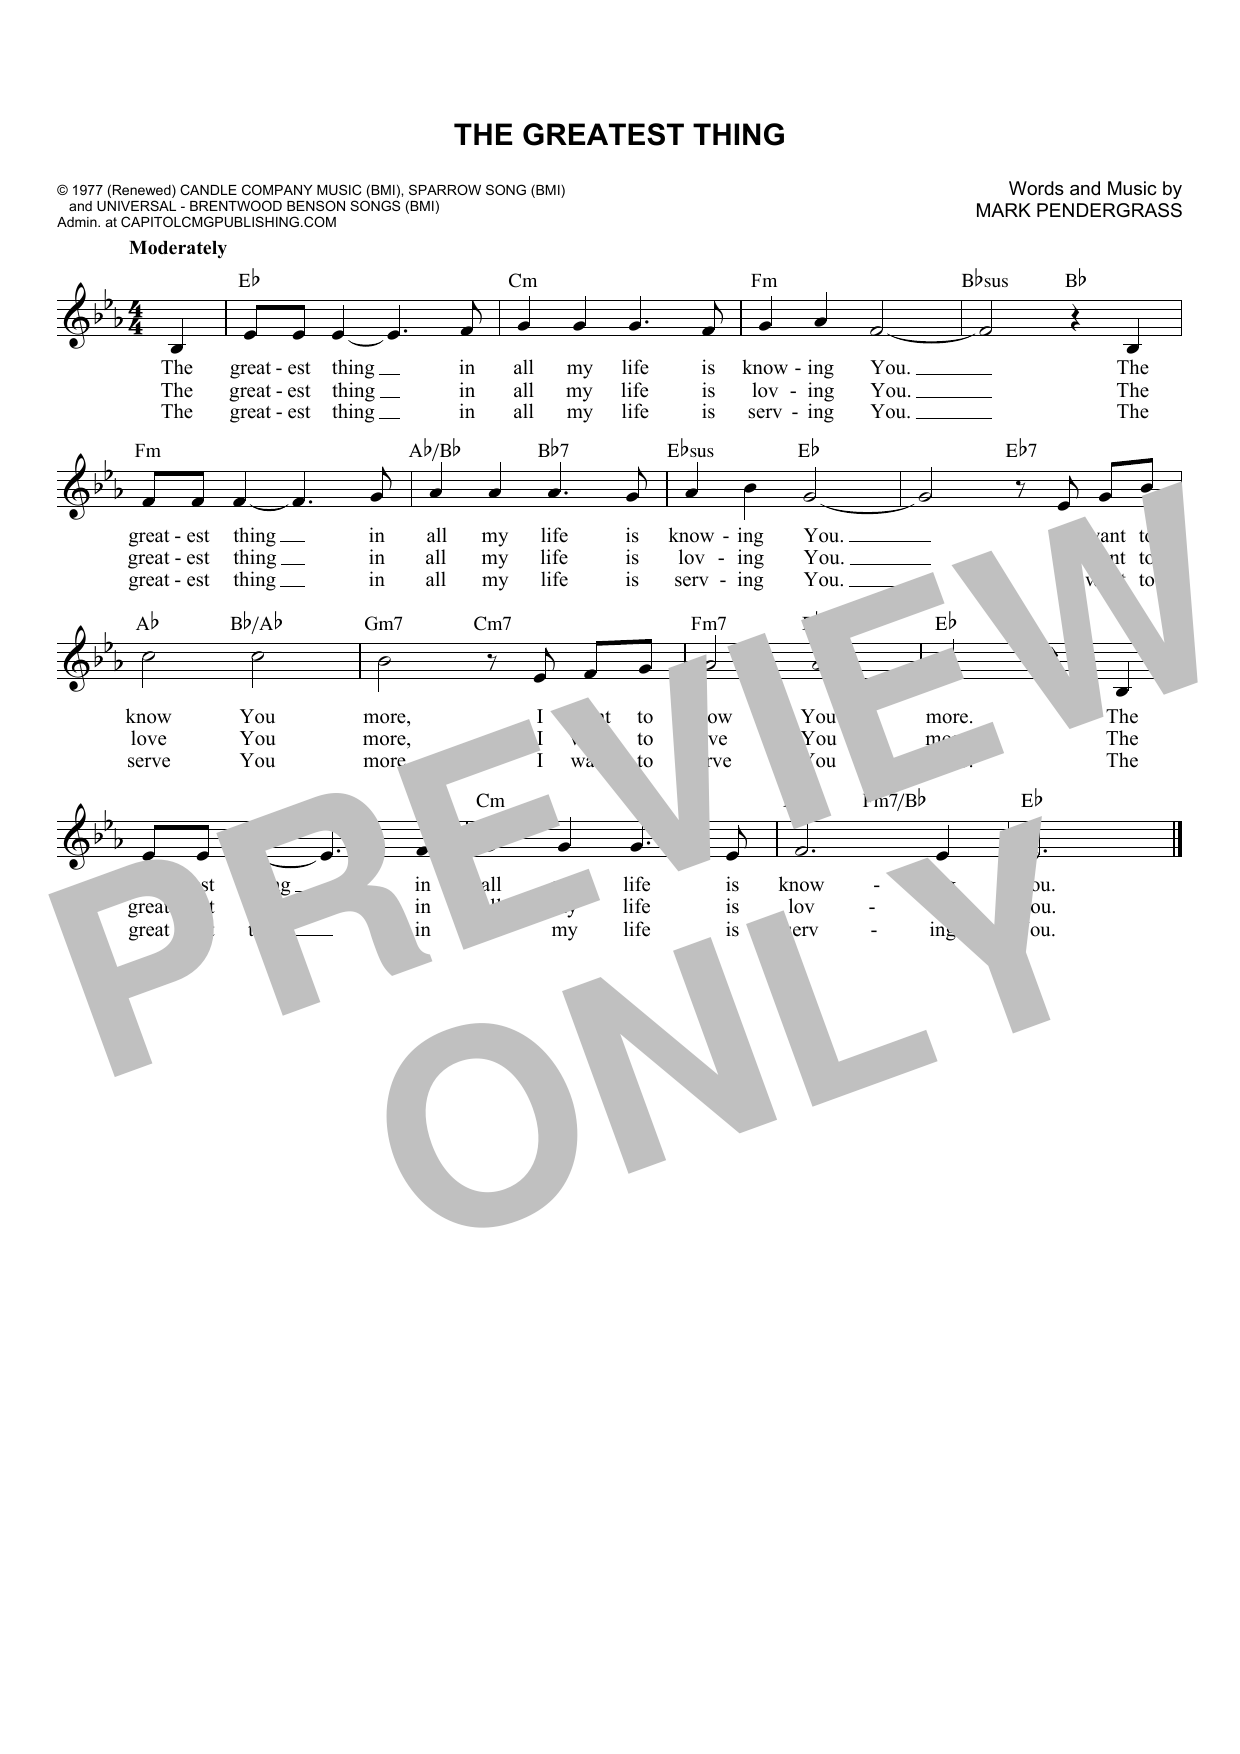 Download Mark Pendergrass The Greatest Thing Sheet Music